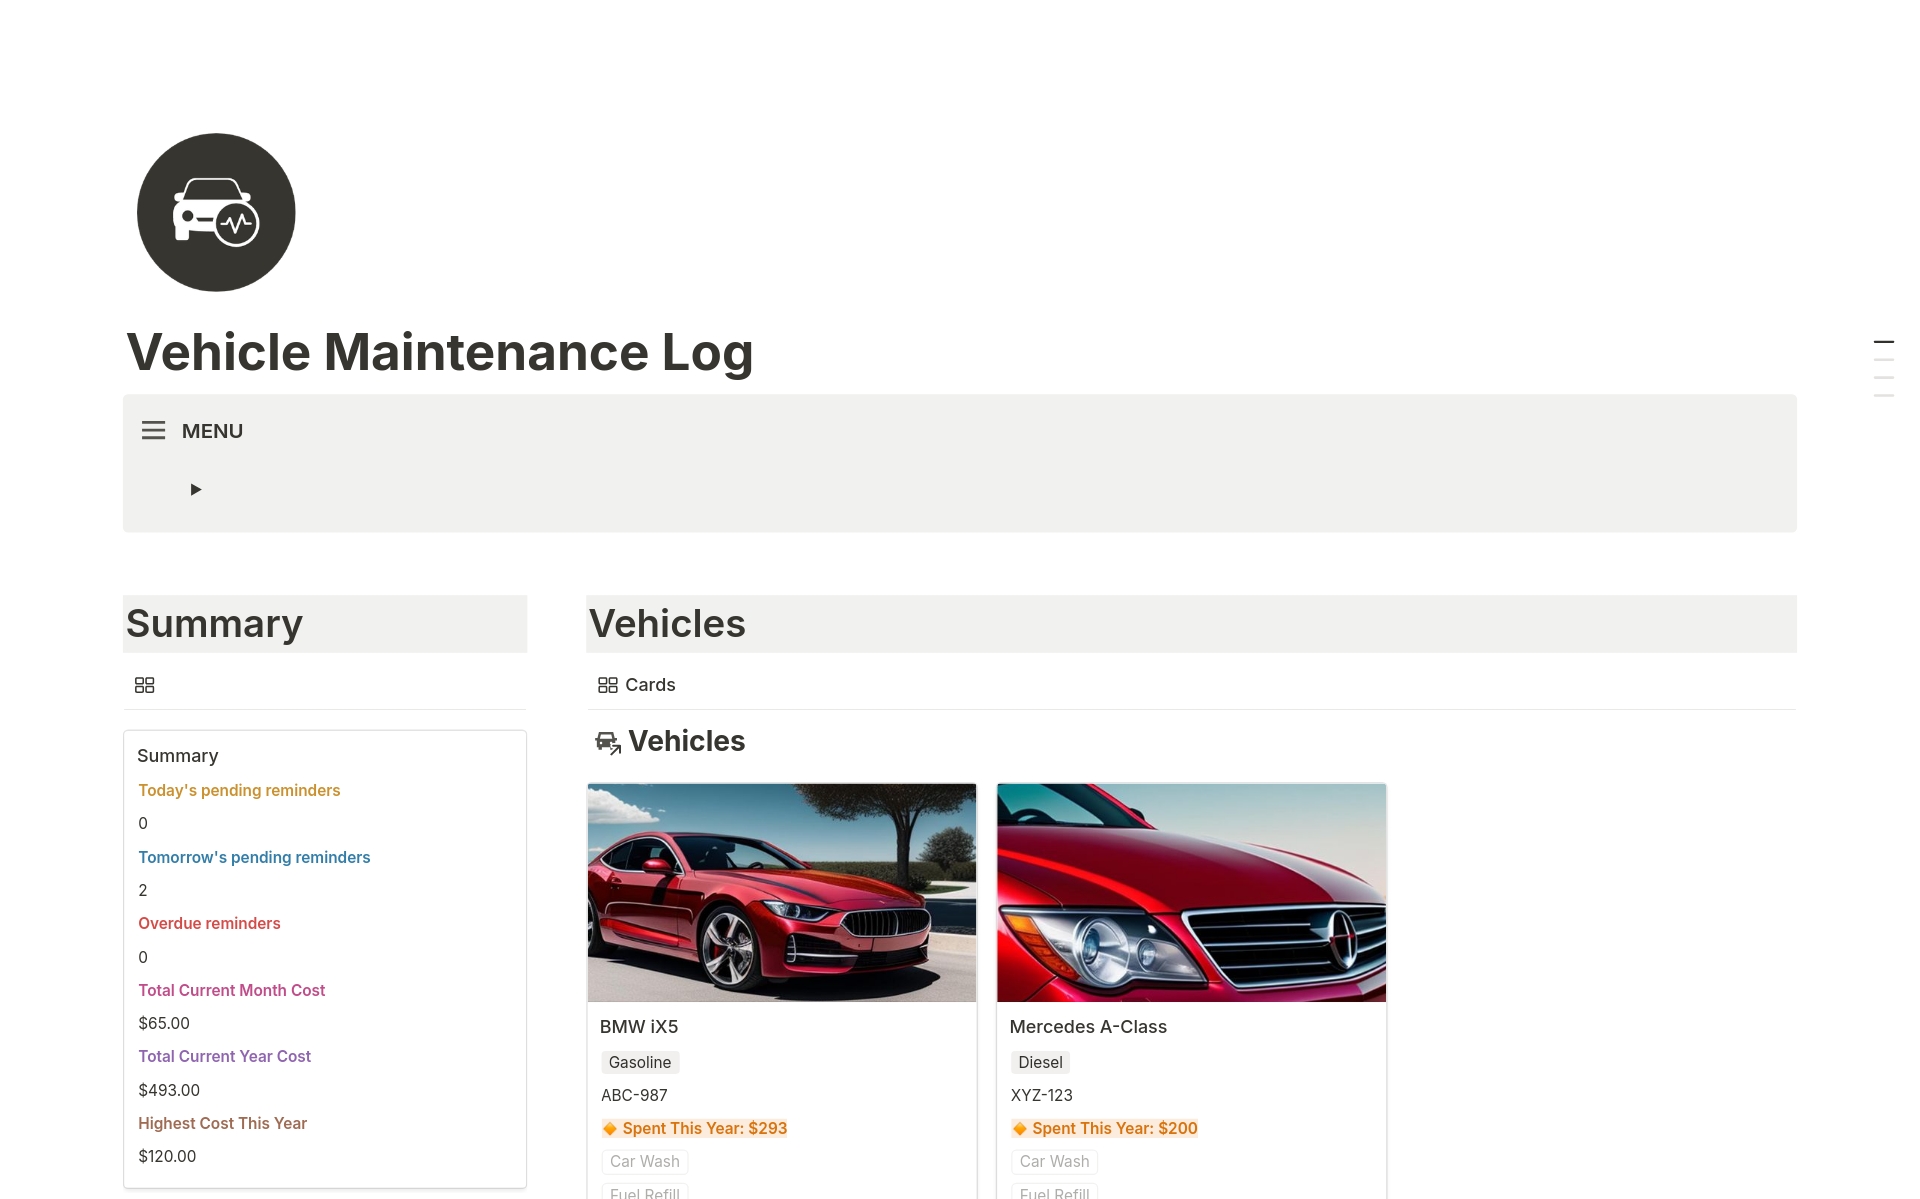 Keeping track of your vehicle maintenance has never been easier. For any type of vehicle, from cars to motorcycles to vans and more. This template is designed to help you manage your vehicles, efficiently record what needs to be done, and track what you've spent.
